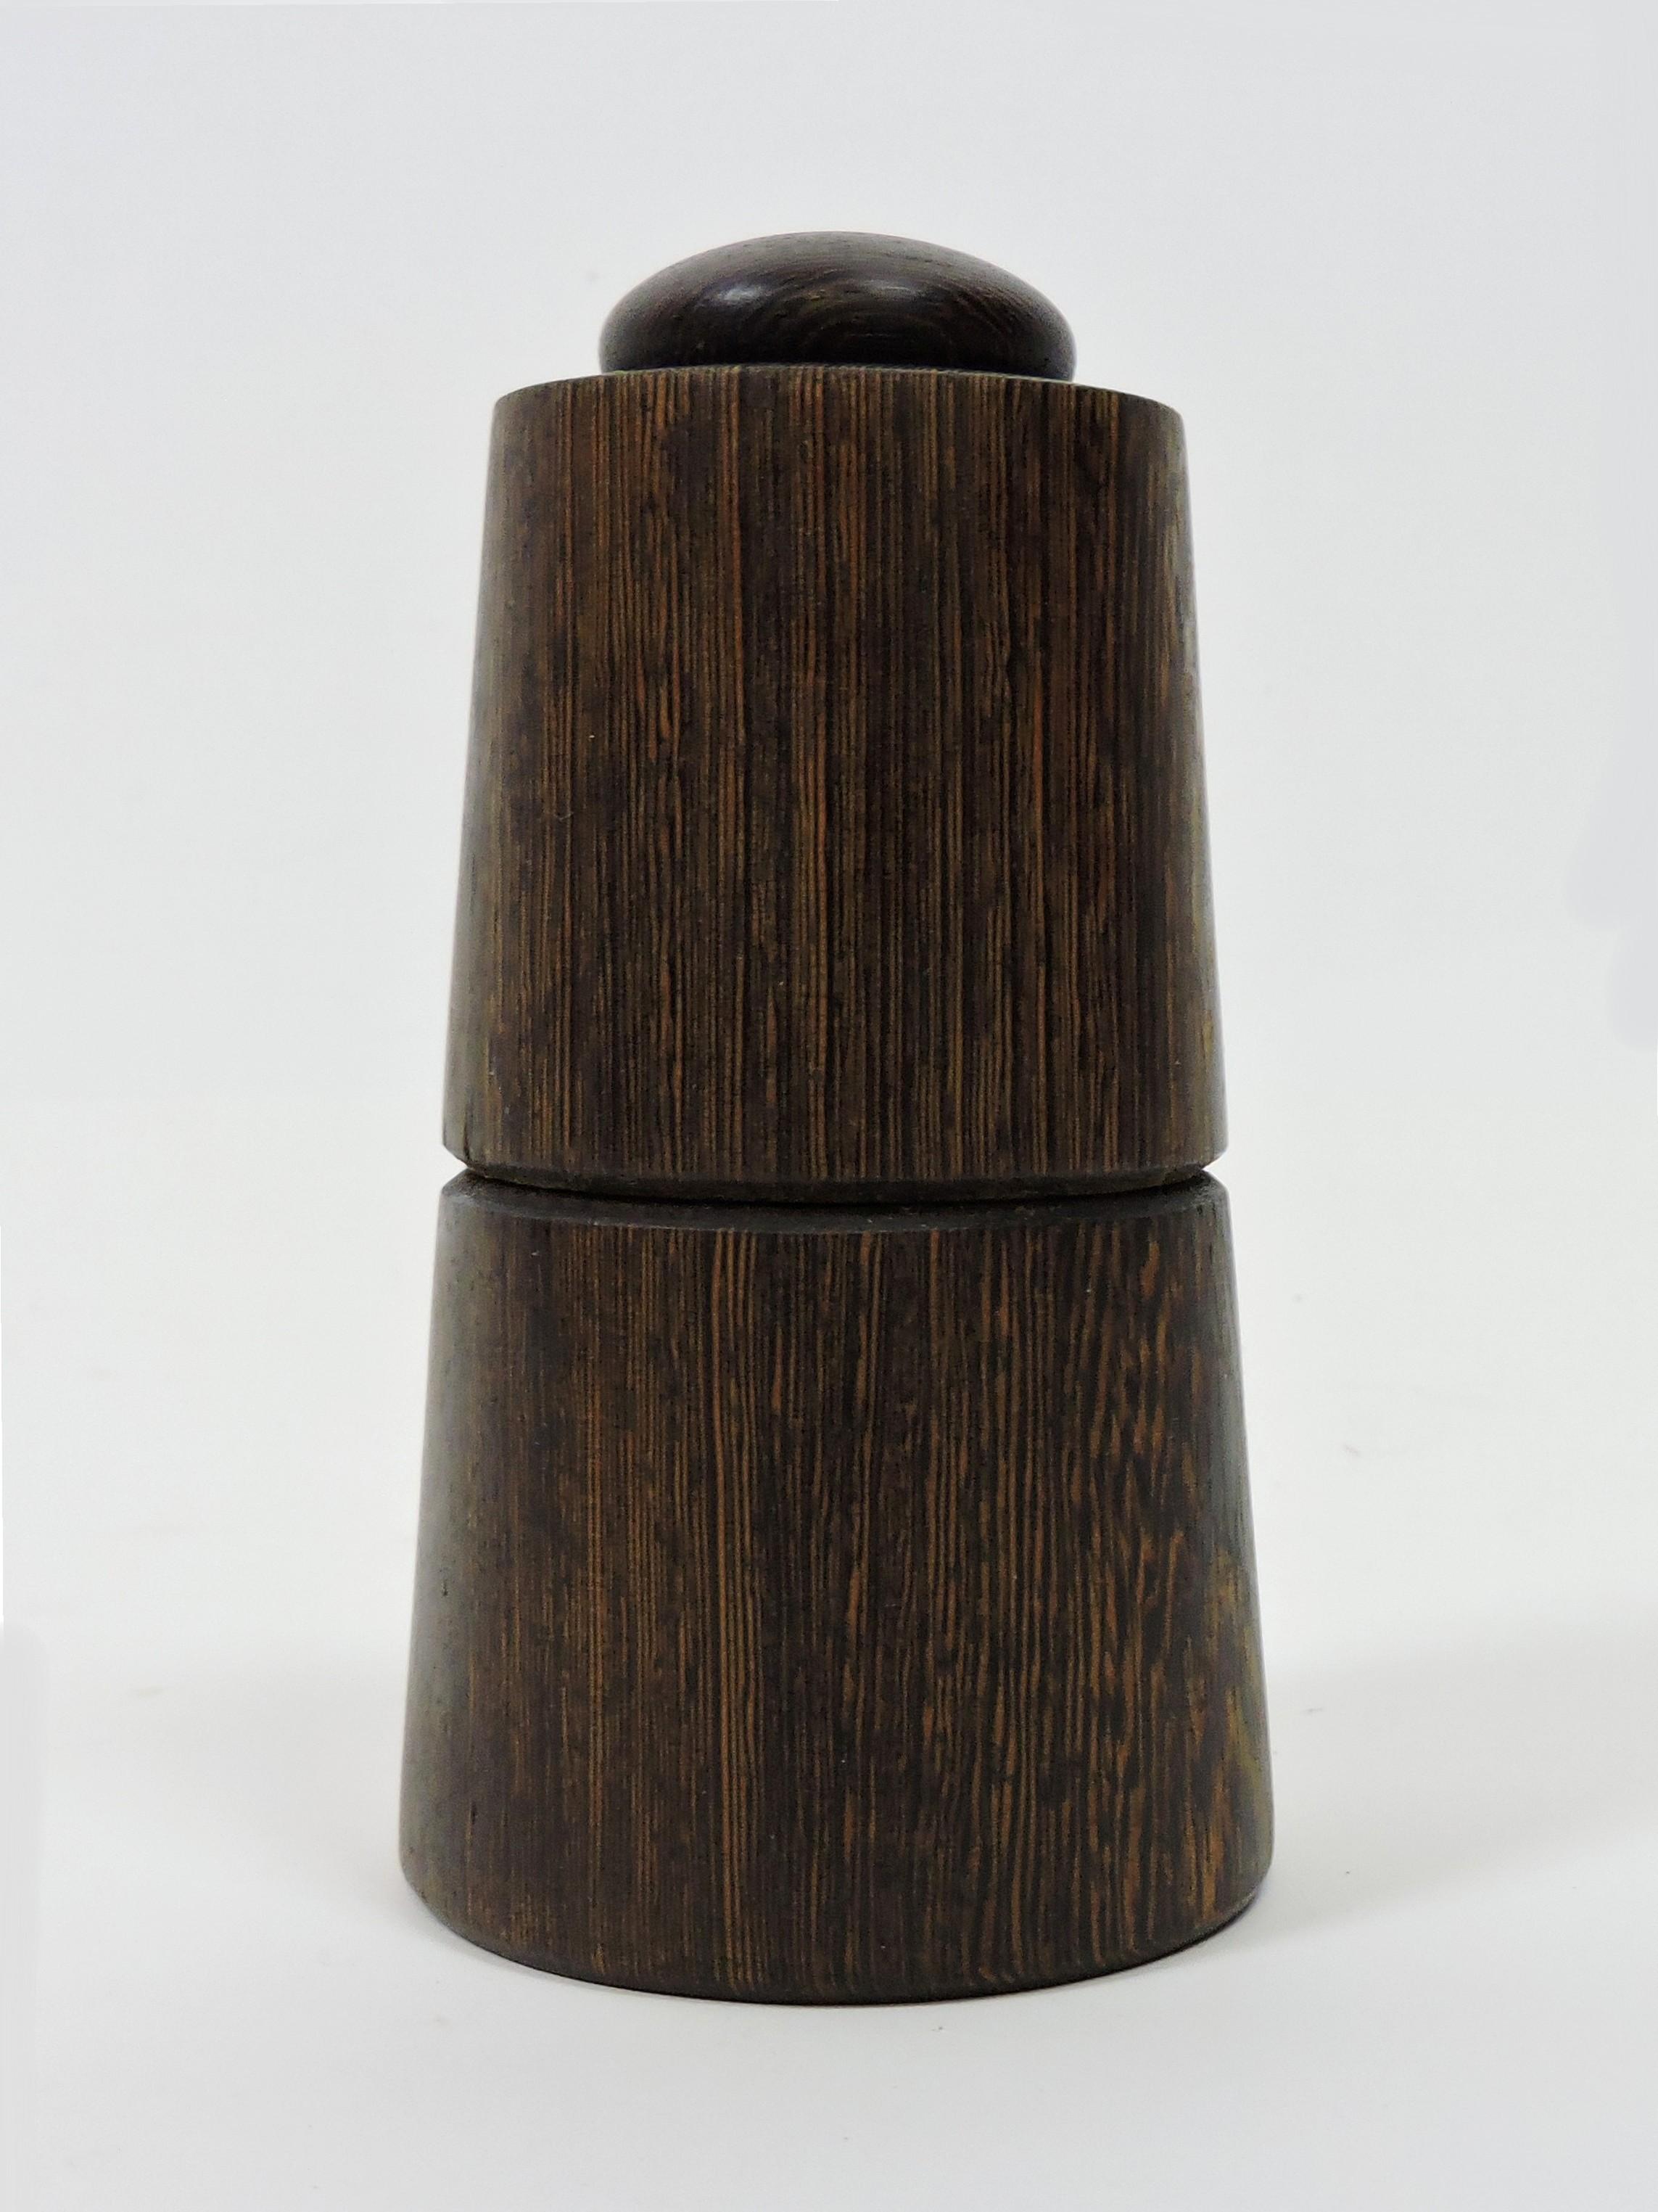 Rare model # 1607 combo salt shaker and peppermill designed by Jens Quistgaard and made in Denmark by Dansk. This is part of the rare woods series made of Wenge and has a Peugeot Freres grinder. There's a plug on the bottom to refill the pepper and